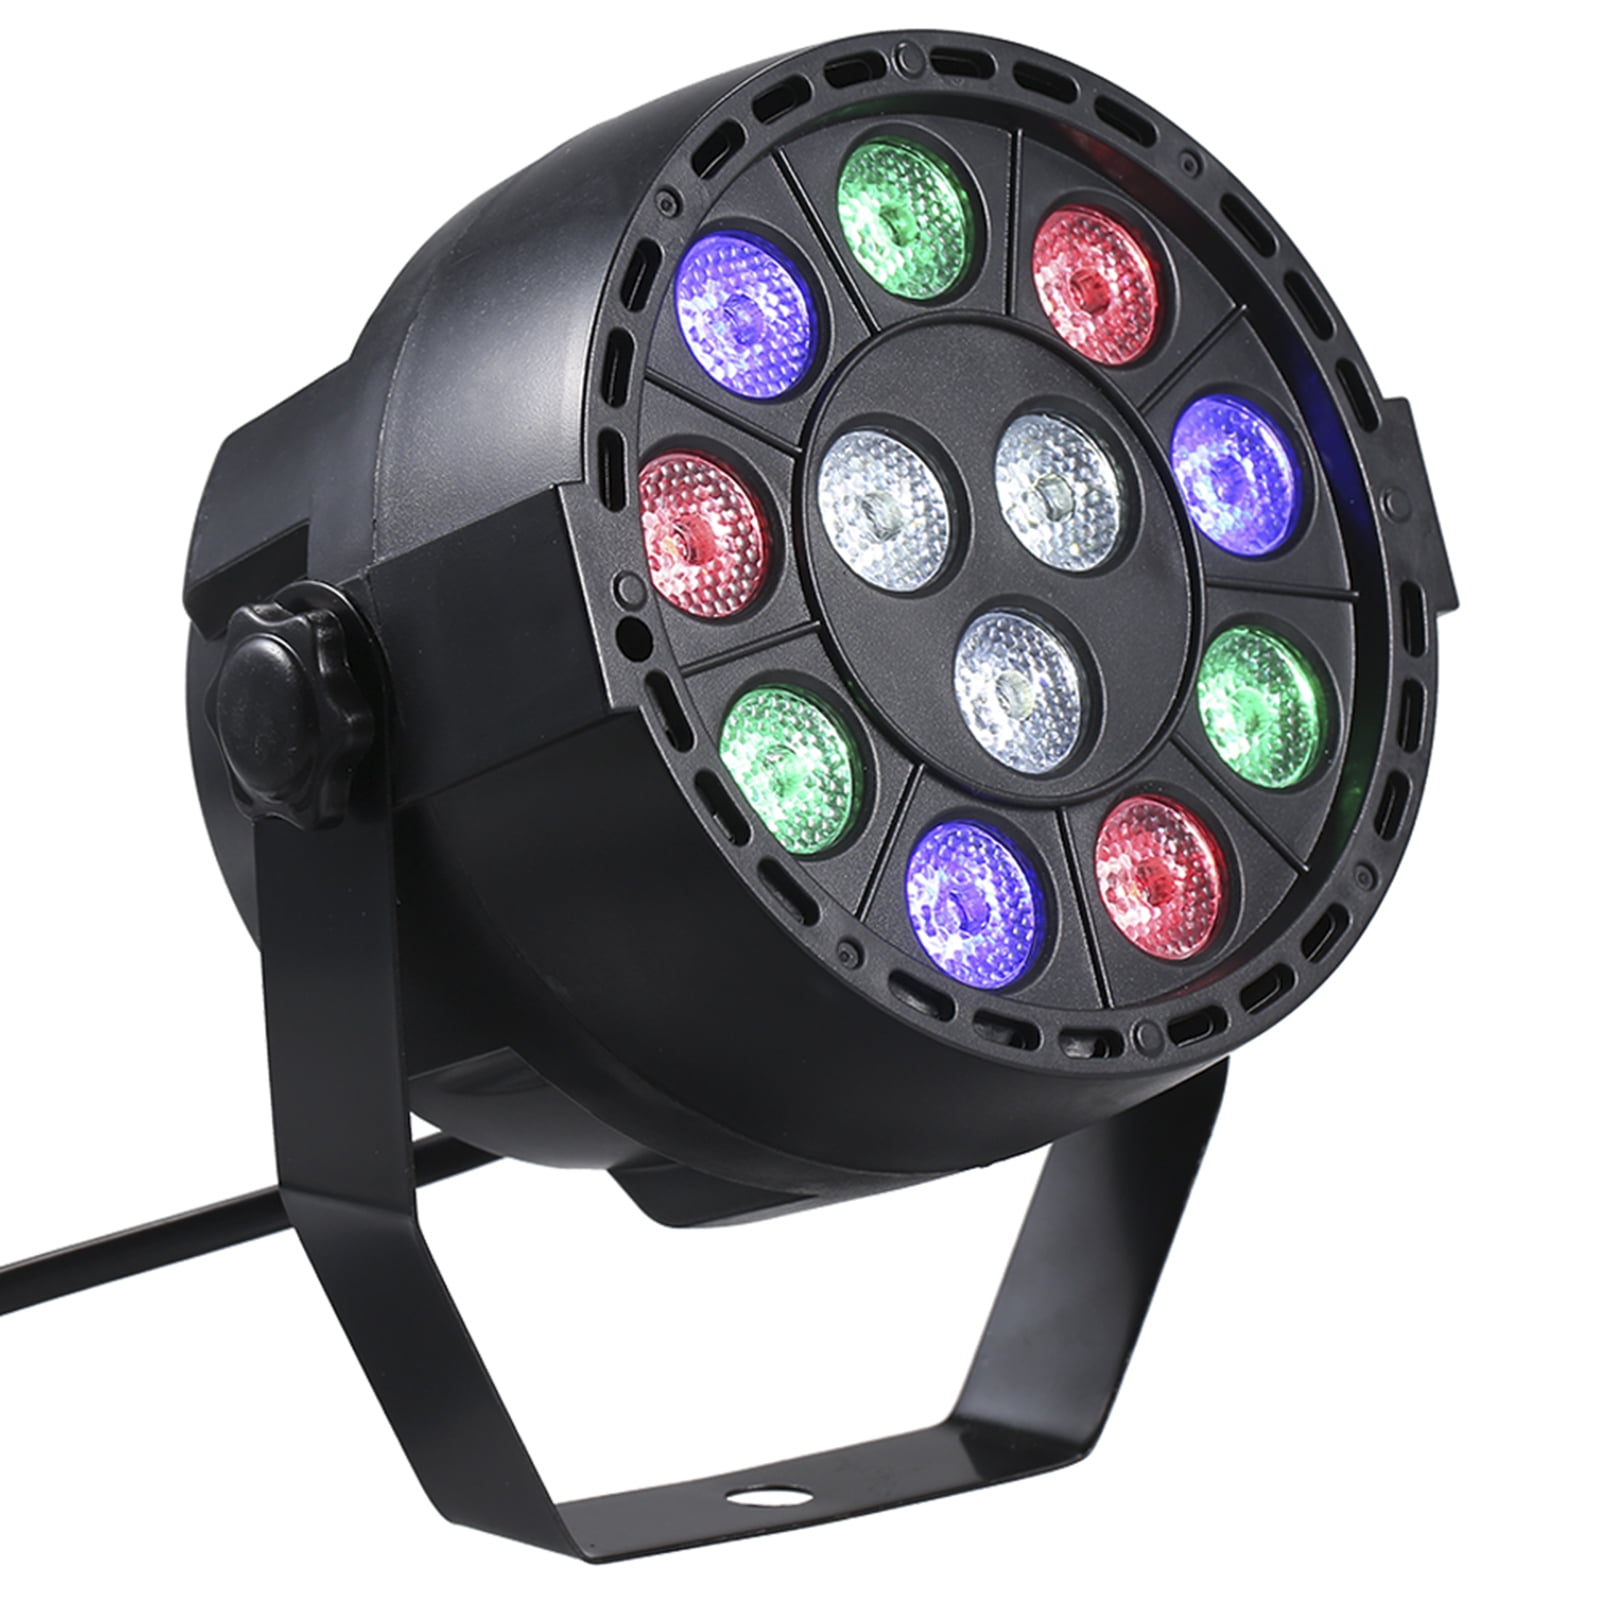 DMX Control for Colorful Light Show Beat Sync Motion Effect Disco Ball Lamp Strobe Party Stage Lights w/ RGB Color LED Bulb Home Dance Party Pyle PDJLT10 Ceiling Projector DJ Party Light 